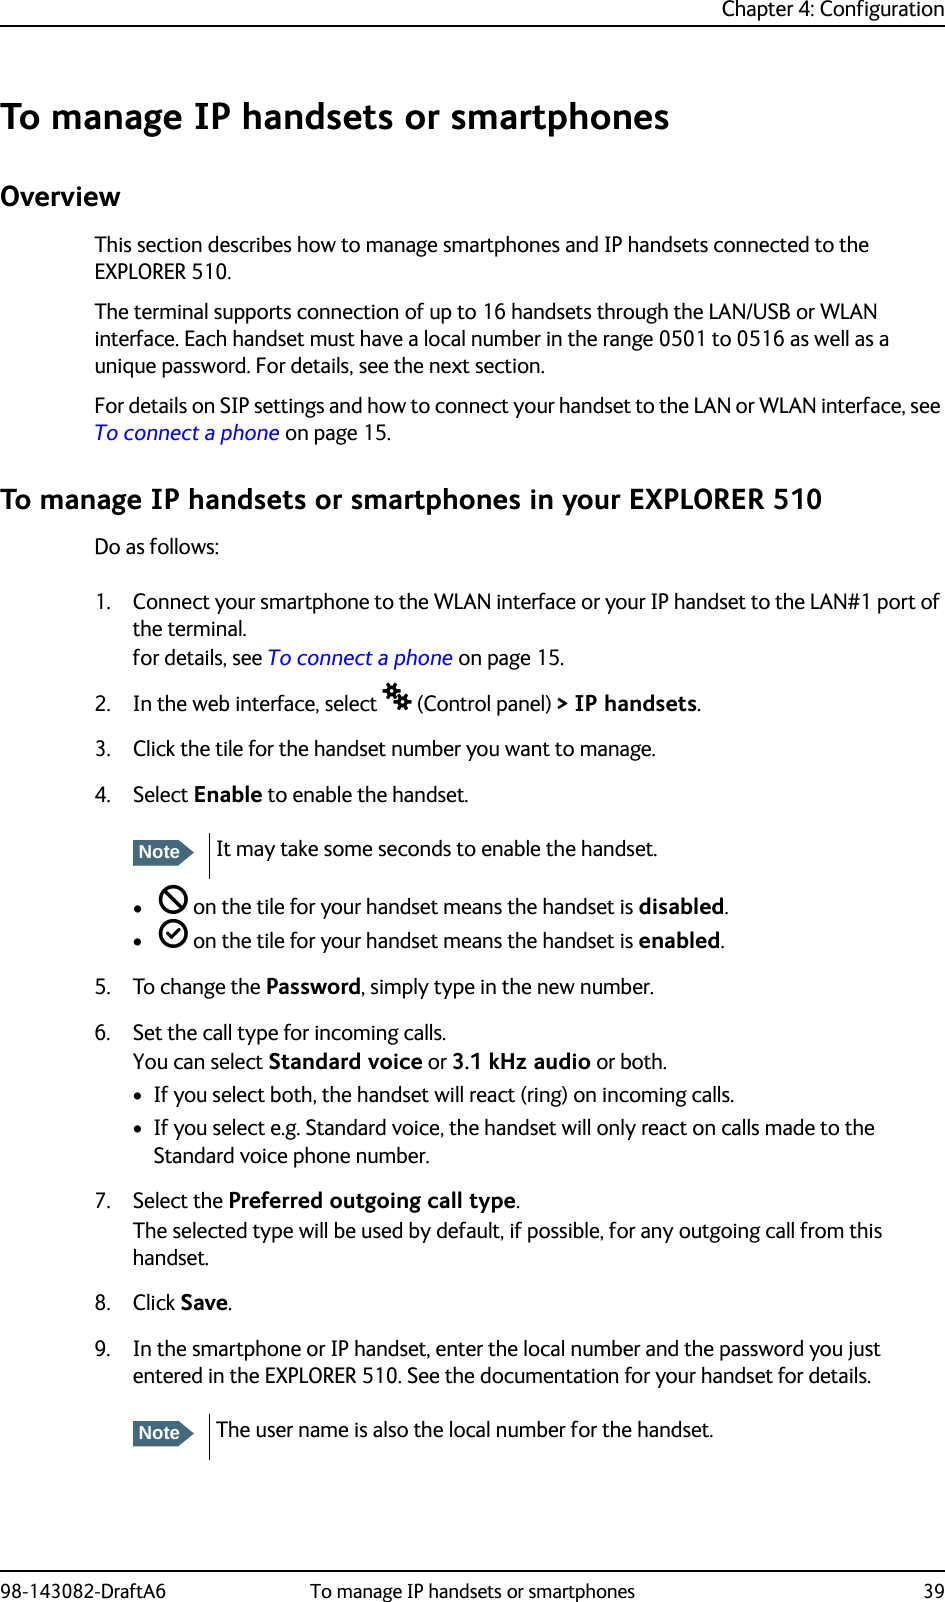 Chapter 4: Configuration98-143082-DraftA6 To manage IP handsets or smartphones 39To manage IP handsets or smartphonesOverviewThis section describes how to manage smartphones and IP handsets connected to the EXPLORER 510.The terminal supports connection of up to 16 handsets through the LAN/USB or WLAN interface. Each handset must have a local number in the range 0501 to 0516 as well as a unique password. For details, see the next section.For details on SIP settings and how to connect your handset to the LAN or WLAN interface, see To connect a phone on page 15.To manage IP handsets or smartphones in your EXPLORER 510Do as follows:1. Connect your smartphone to the WLAN interface or your IP handset to the LAN#1 port of the terminal.for details, see To connect a phone on page 15.2. In the web interface, select  (Control panel) &gt; IP handsets.3. Click the tile for the handset number you want to manage.4. Select Enable to enable the handset.•  on the tile for your handset means the handset is disabled.•  on the tile for your handset means the handset is enabled.5. To change the Password, simply type in the new number.6. Set the call type for incoming calls.You can select Standard voice or 3.1 kHz audio or both. • If you select both, the handset will react (ring) on incoming calls. • If you select e.g. Standard voice, the handset will only react on calls made to the Standard voice phone number.7. Select the Preferred outgoing call type.The selected type will be used by default, if possible, for any outgoing call from this handset.8. Click Save.9. In the smartphone or IP handset, enter the local number and the password you just entered in the EXPLORER 510. See the documentation for your handset for details.NoteIt may take some seconds to enable the handset.NoteThe user name is also the local number for the handset.